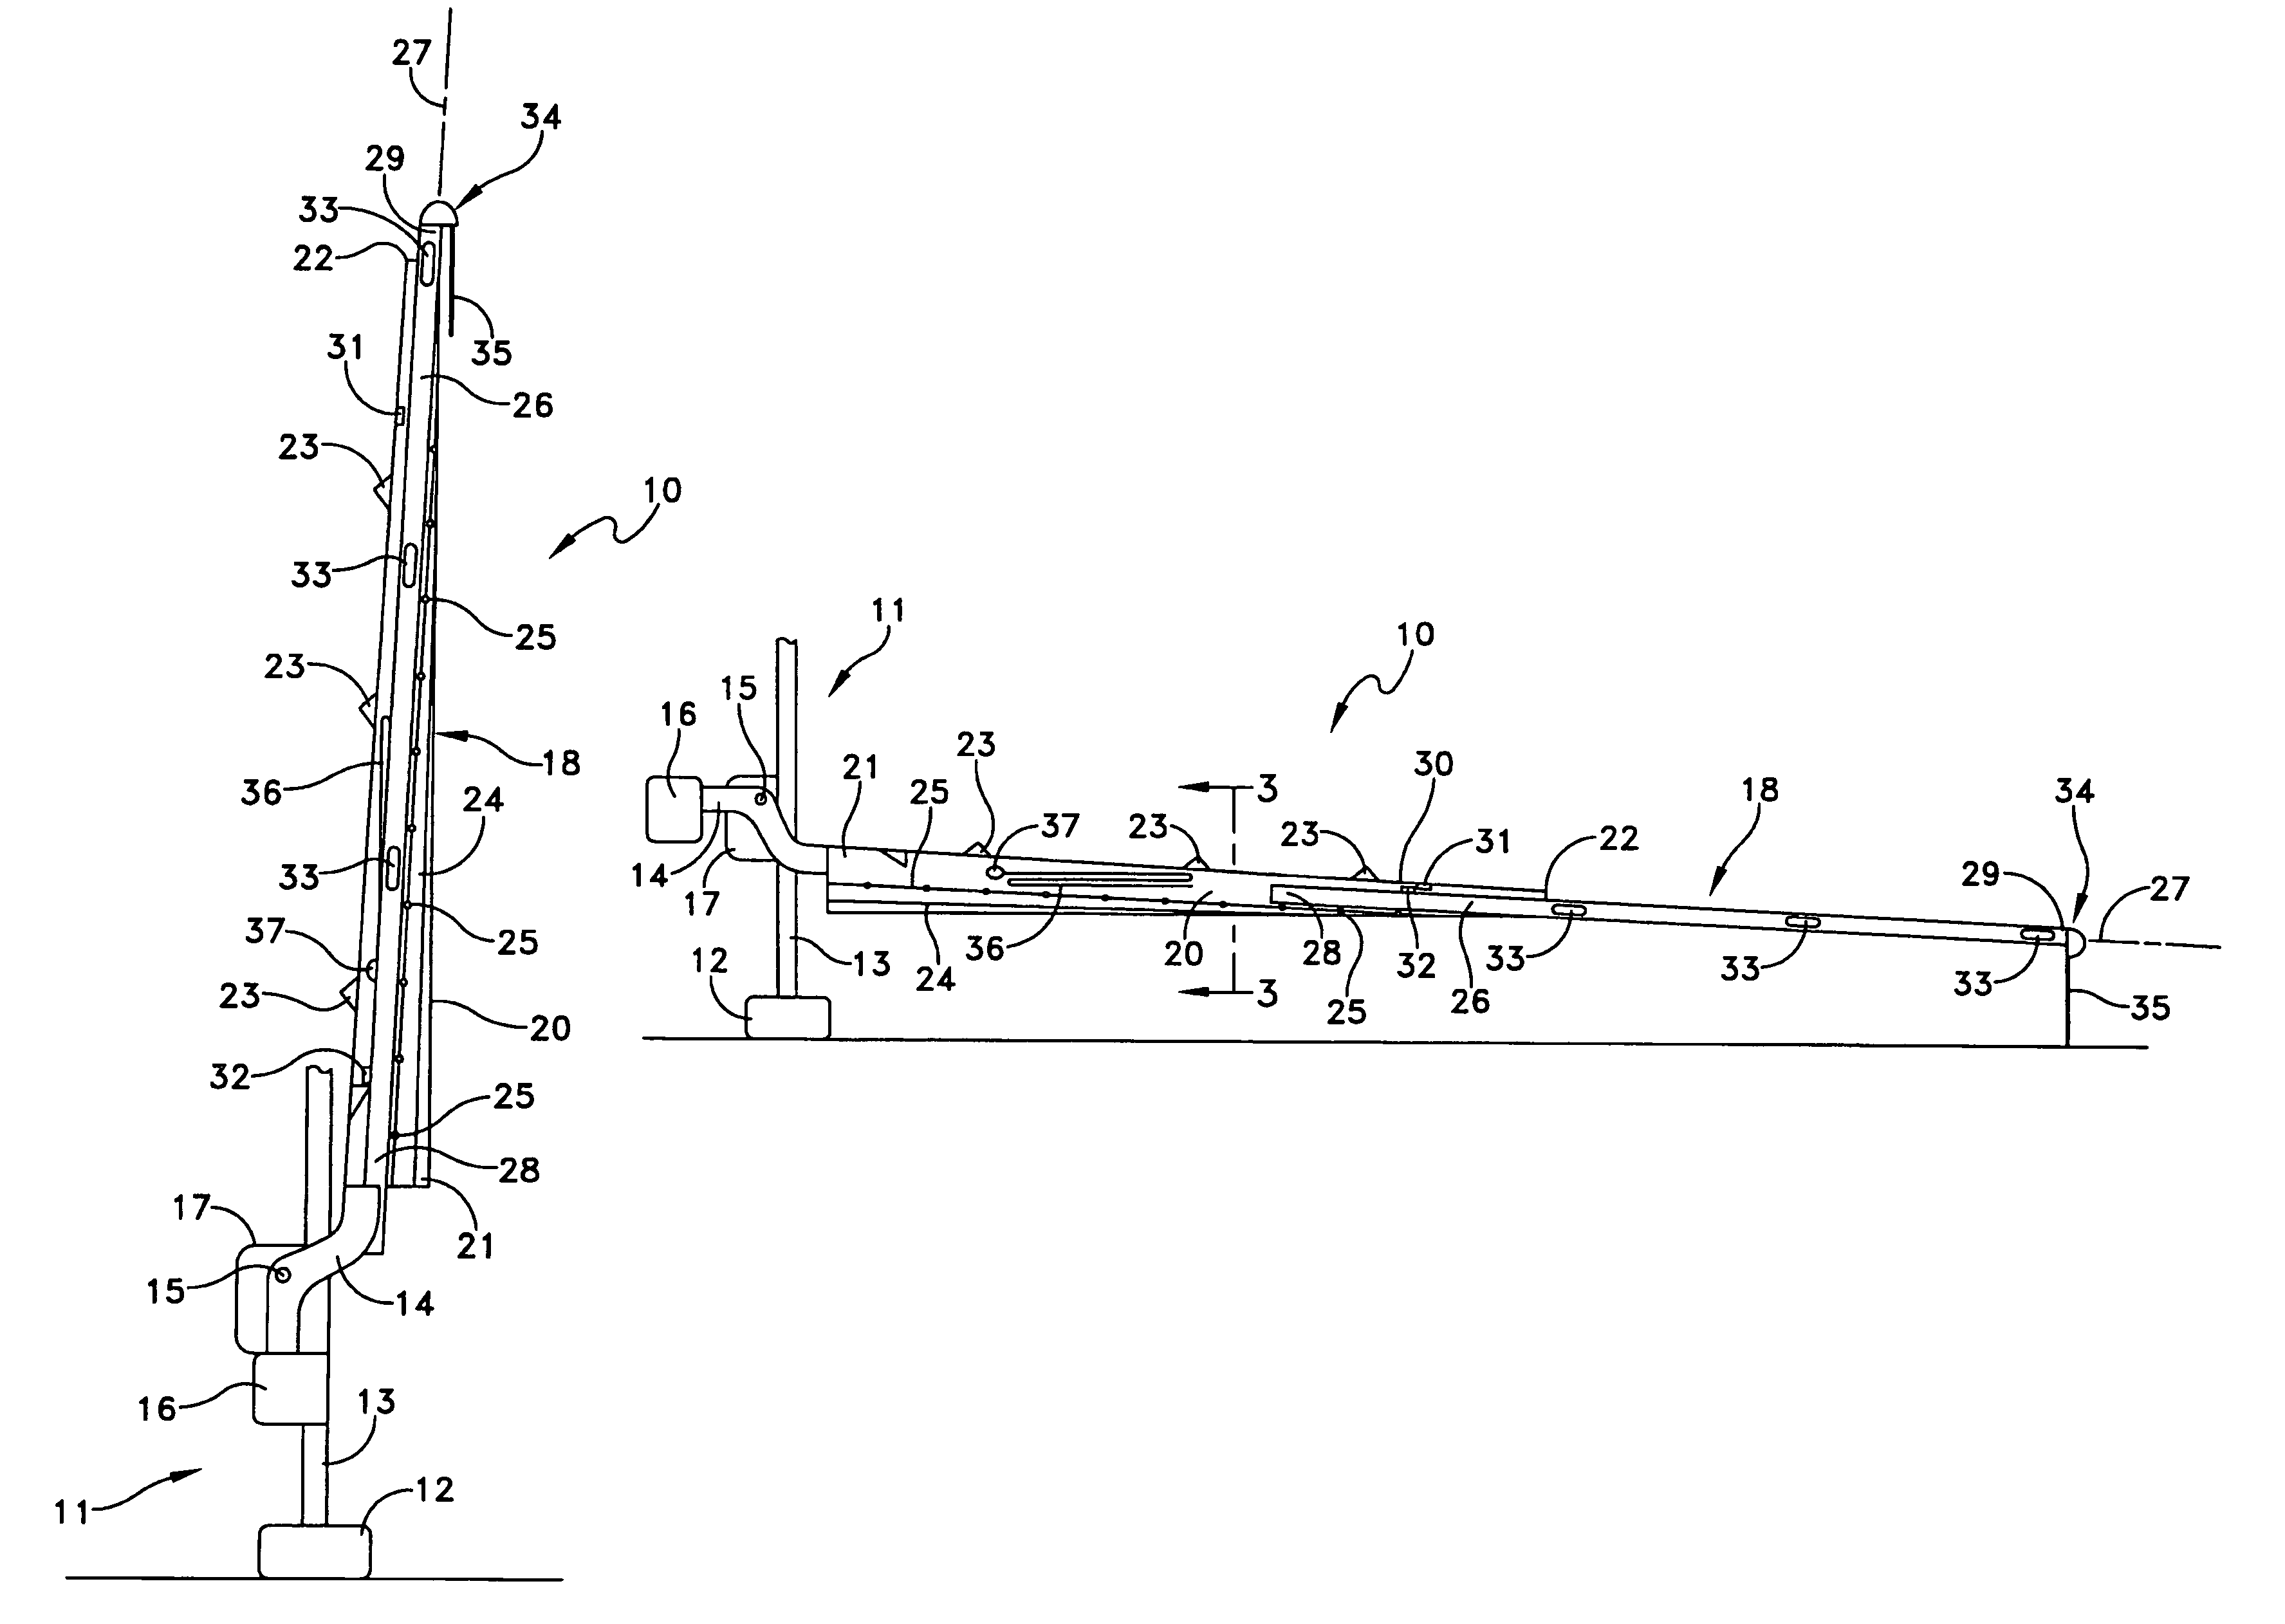 Apparatus for controlling traffic flow along a pathway